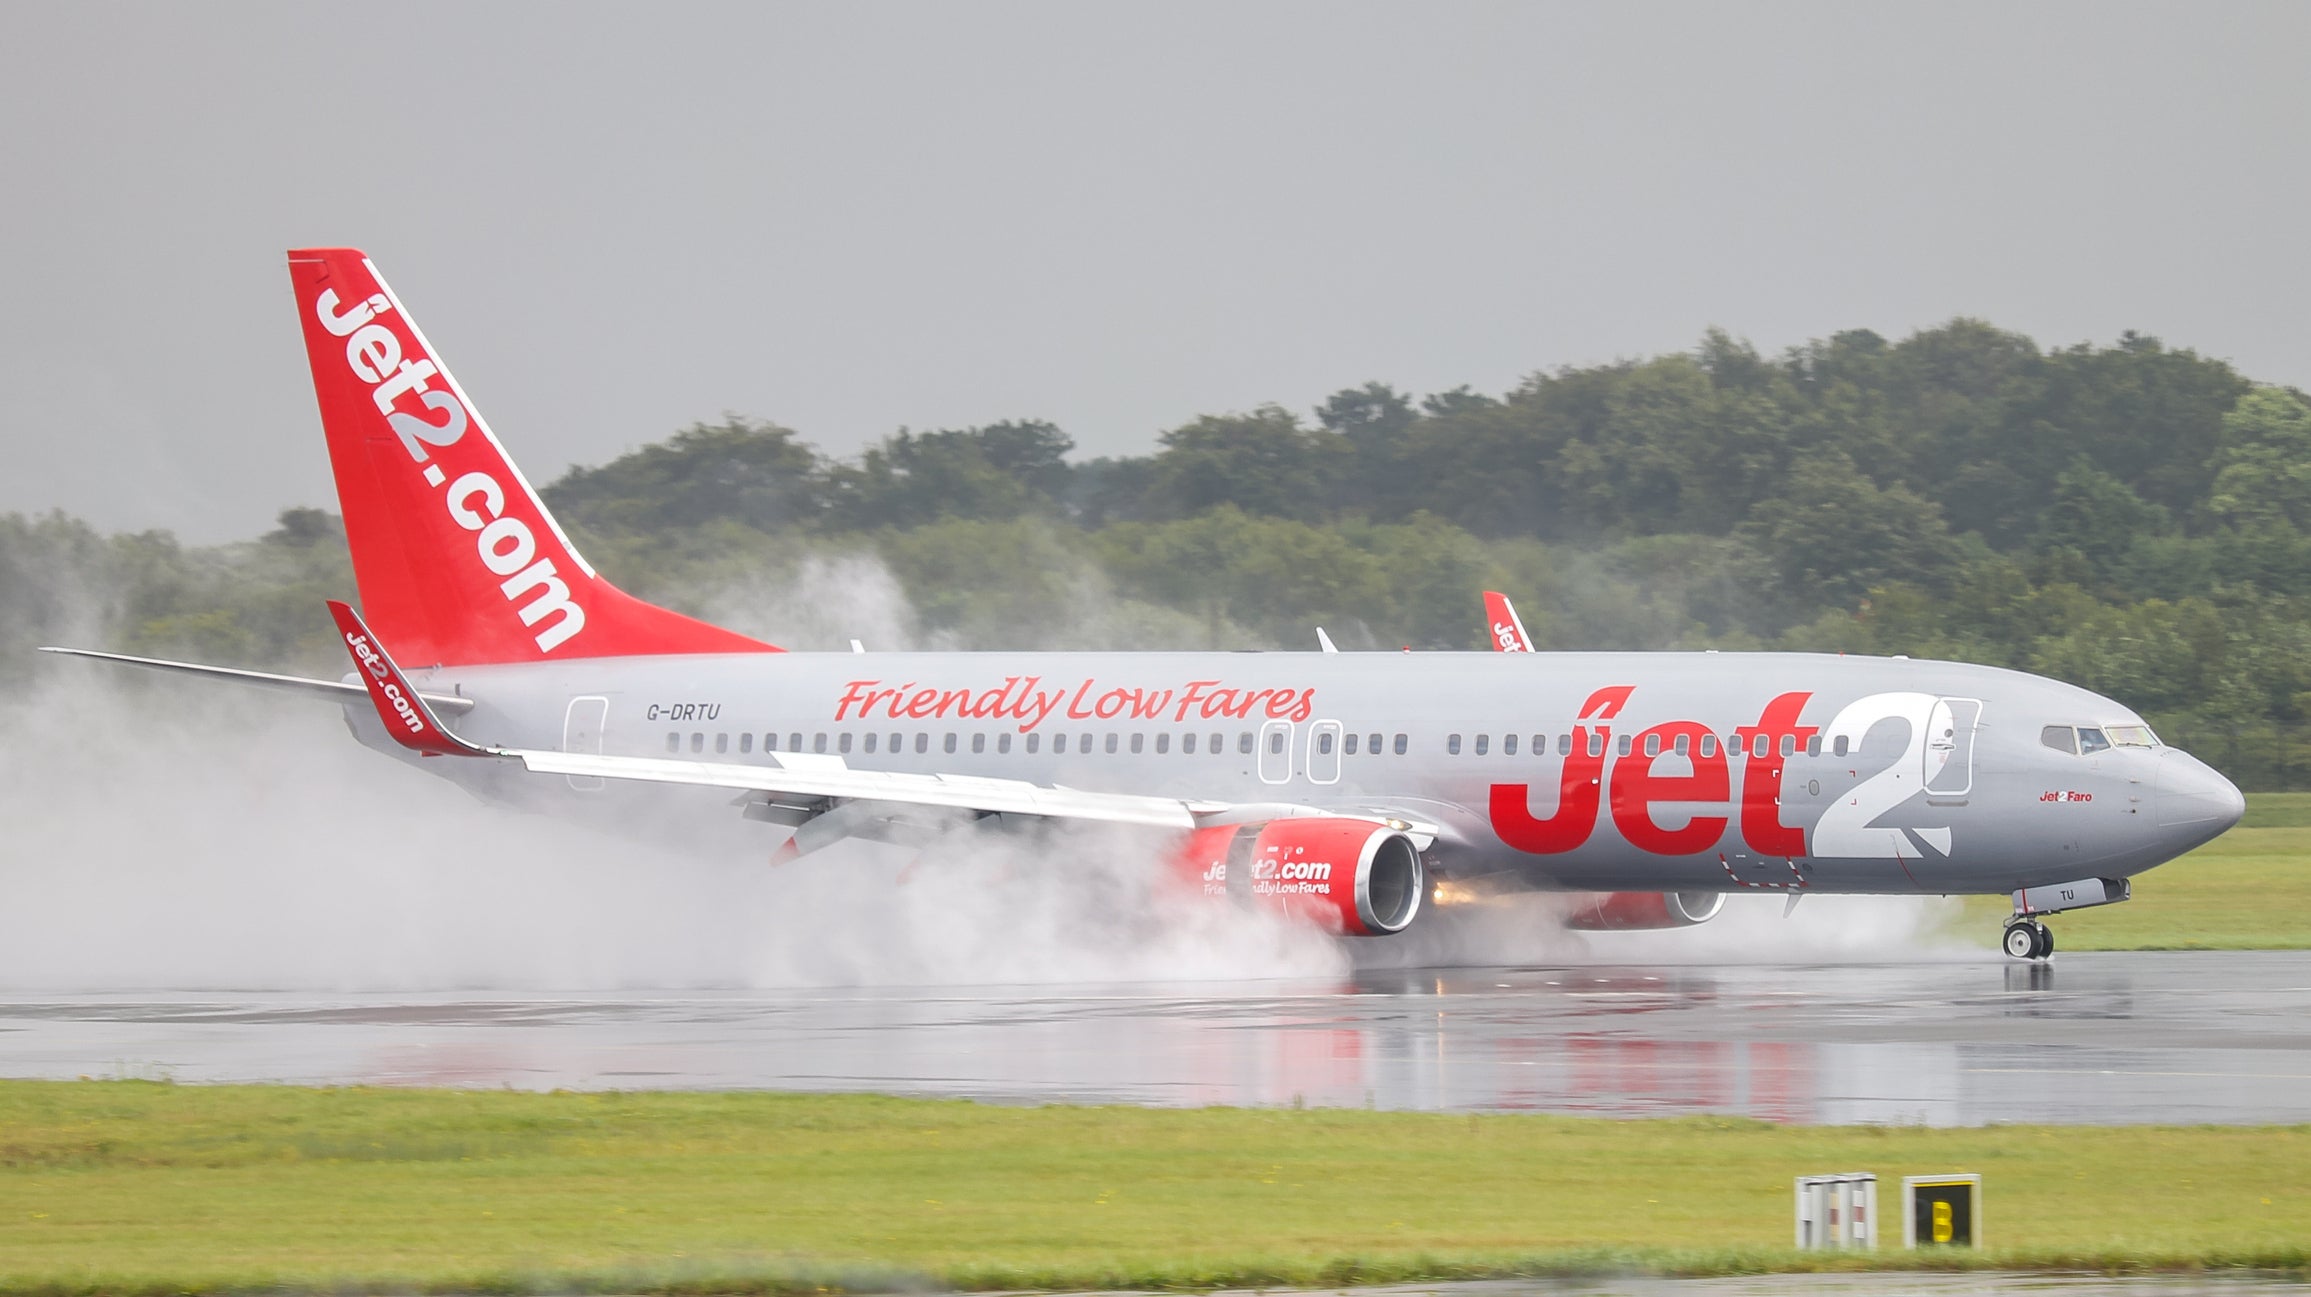 A Jet2 Boeing 737 touches down at Manchester Airport